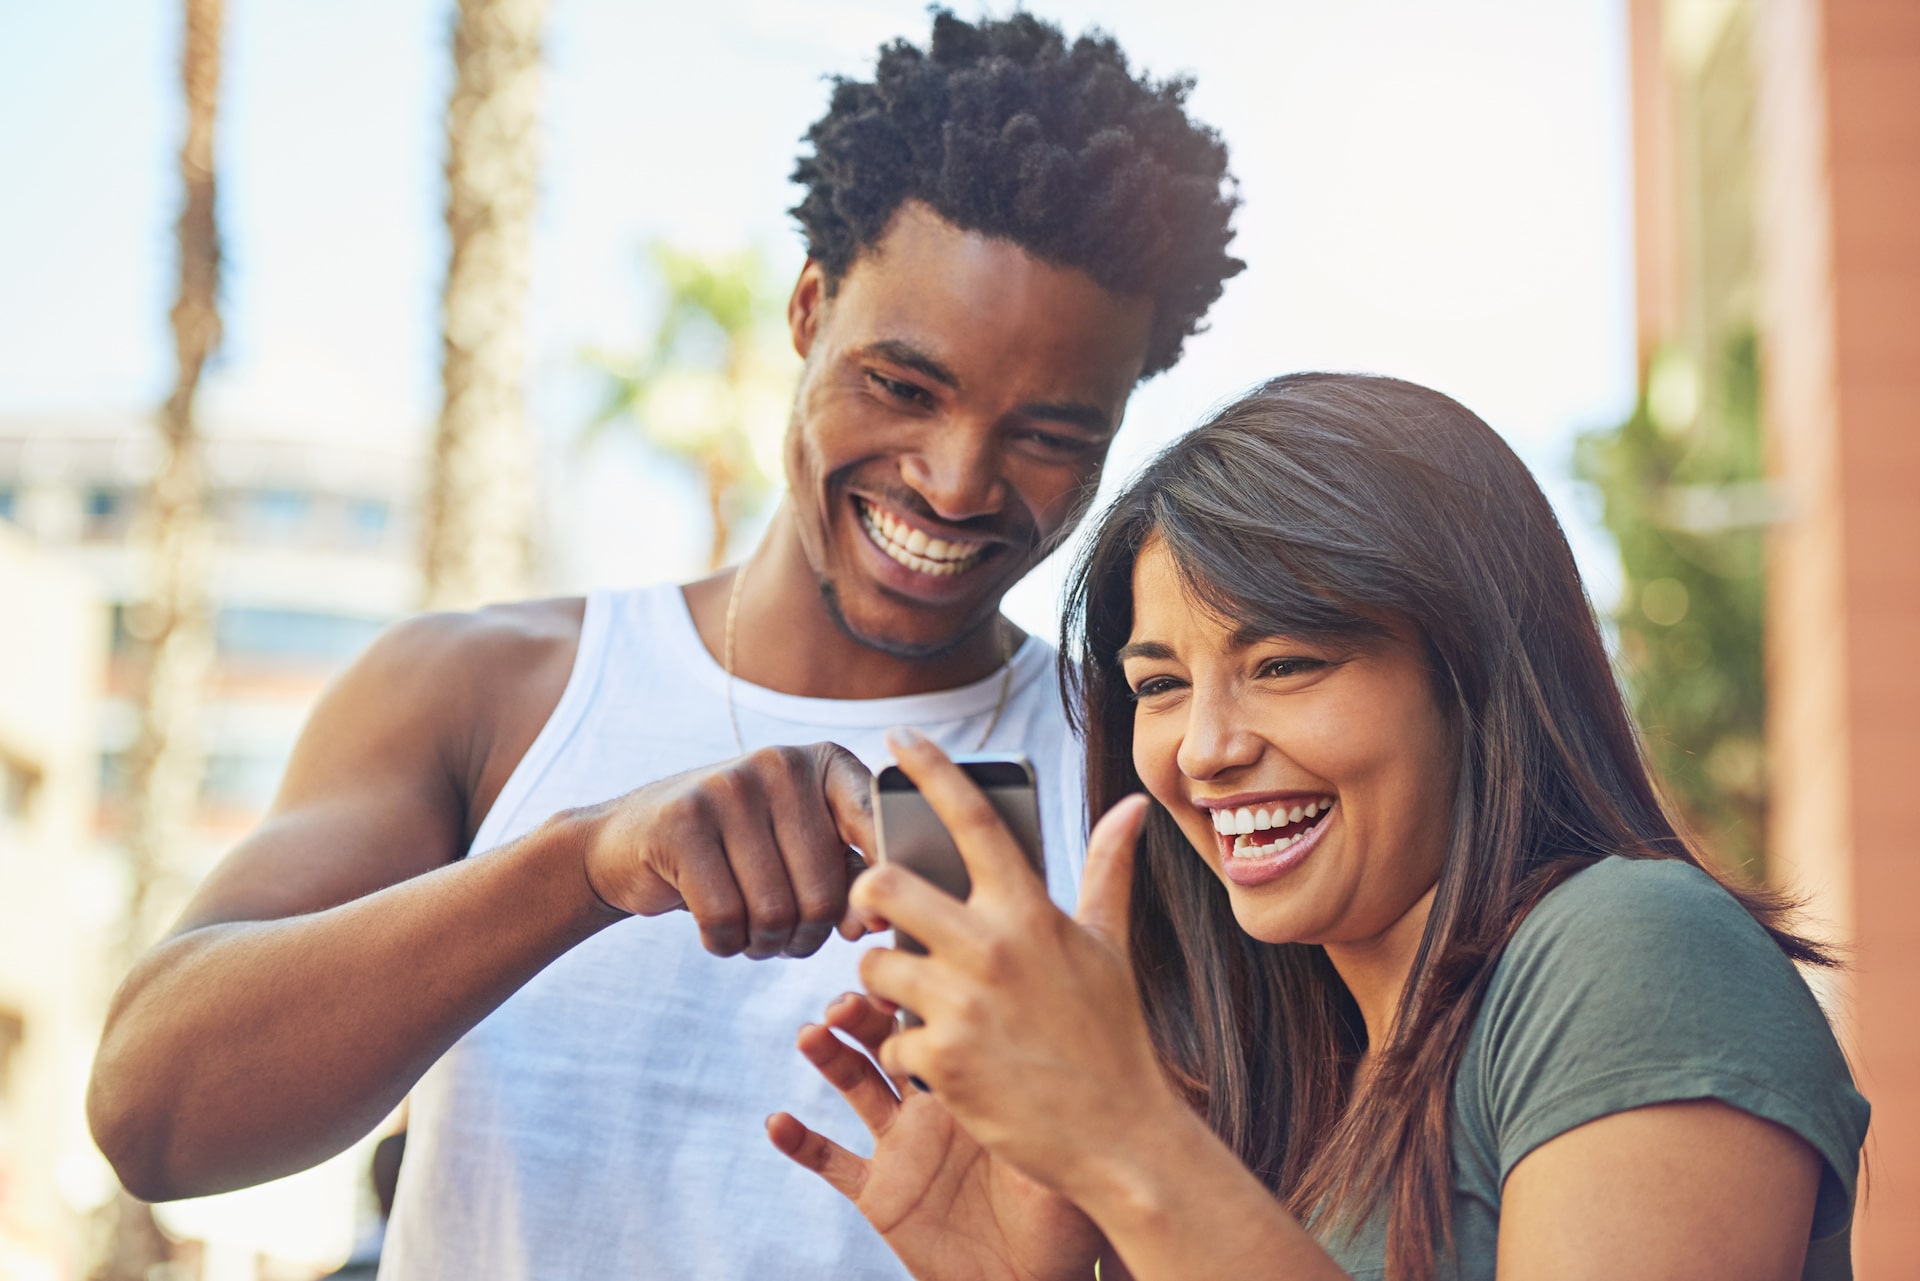 Two people, a man and woman, looking at a phone and laughing. They are outside.